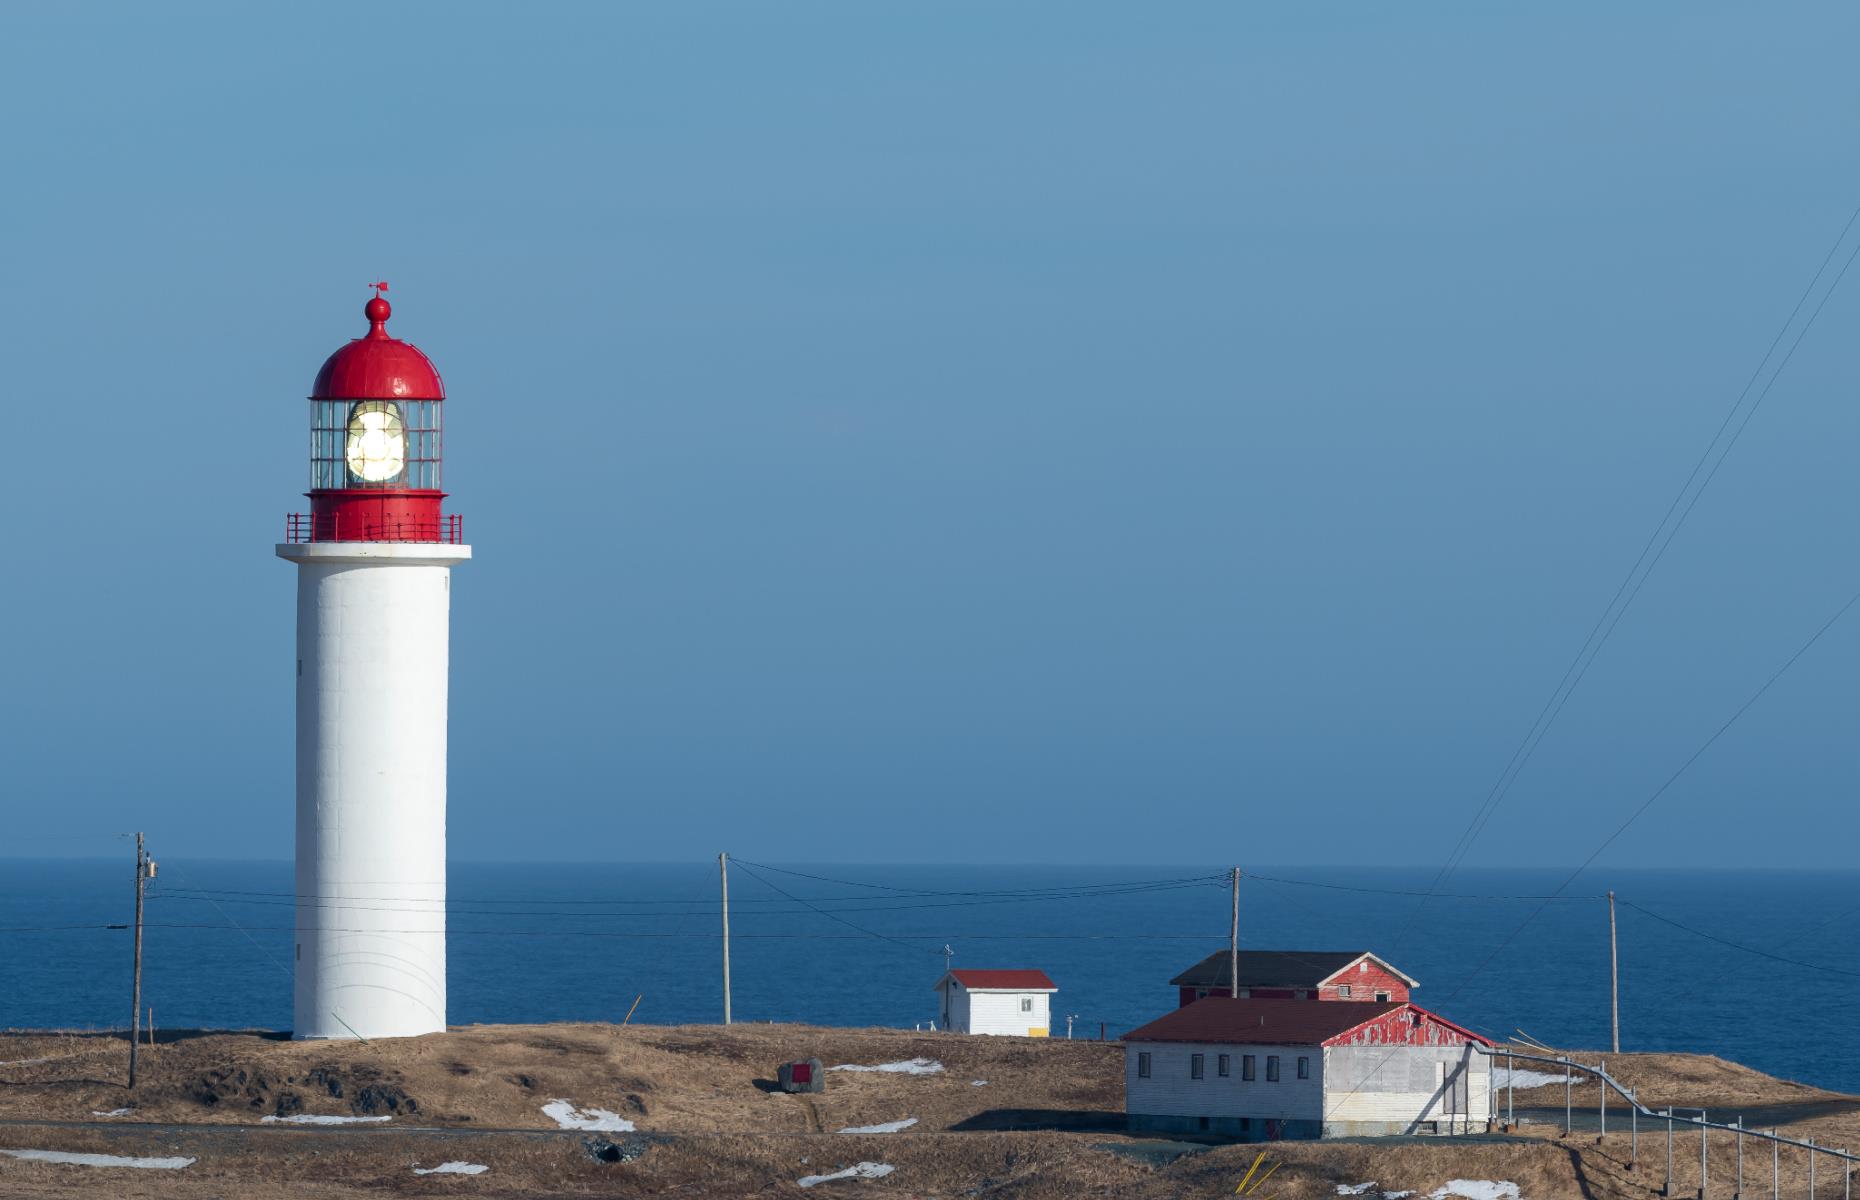 <p>As they travel towards the bottom of the peninsula, visitors will find Ferryland, one of the oldest European settlements in North America, where archeologists have found remnants of homes built in the 17th century. Fans of more recent history will also want to stop at the Cape Race lighthouse, which received the distress call from the <a href="https://www.loveexploring.com/gallerylist/72633/secrets-of-the-titanic-life-onboard-the-worlds-most-famous-ship">doomed Titanic in 1912</a>. </p>  <p><strong><a href="https://www.loveexploring.com/galleries/72454/canadas-most-adorable-small-towns-and-villages-to-visit-in-2021?page=1">Discover Canada's most beautiful small towns and villages</a></strong></p>